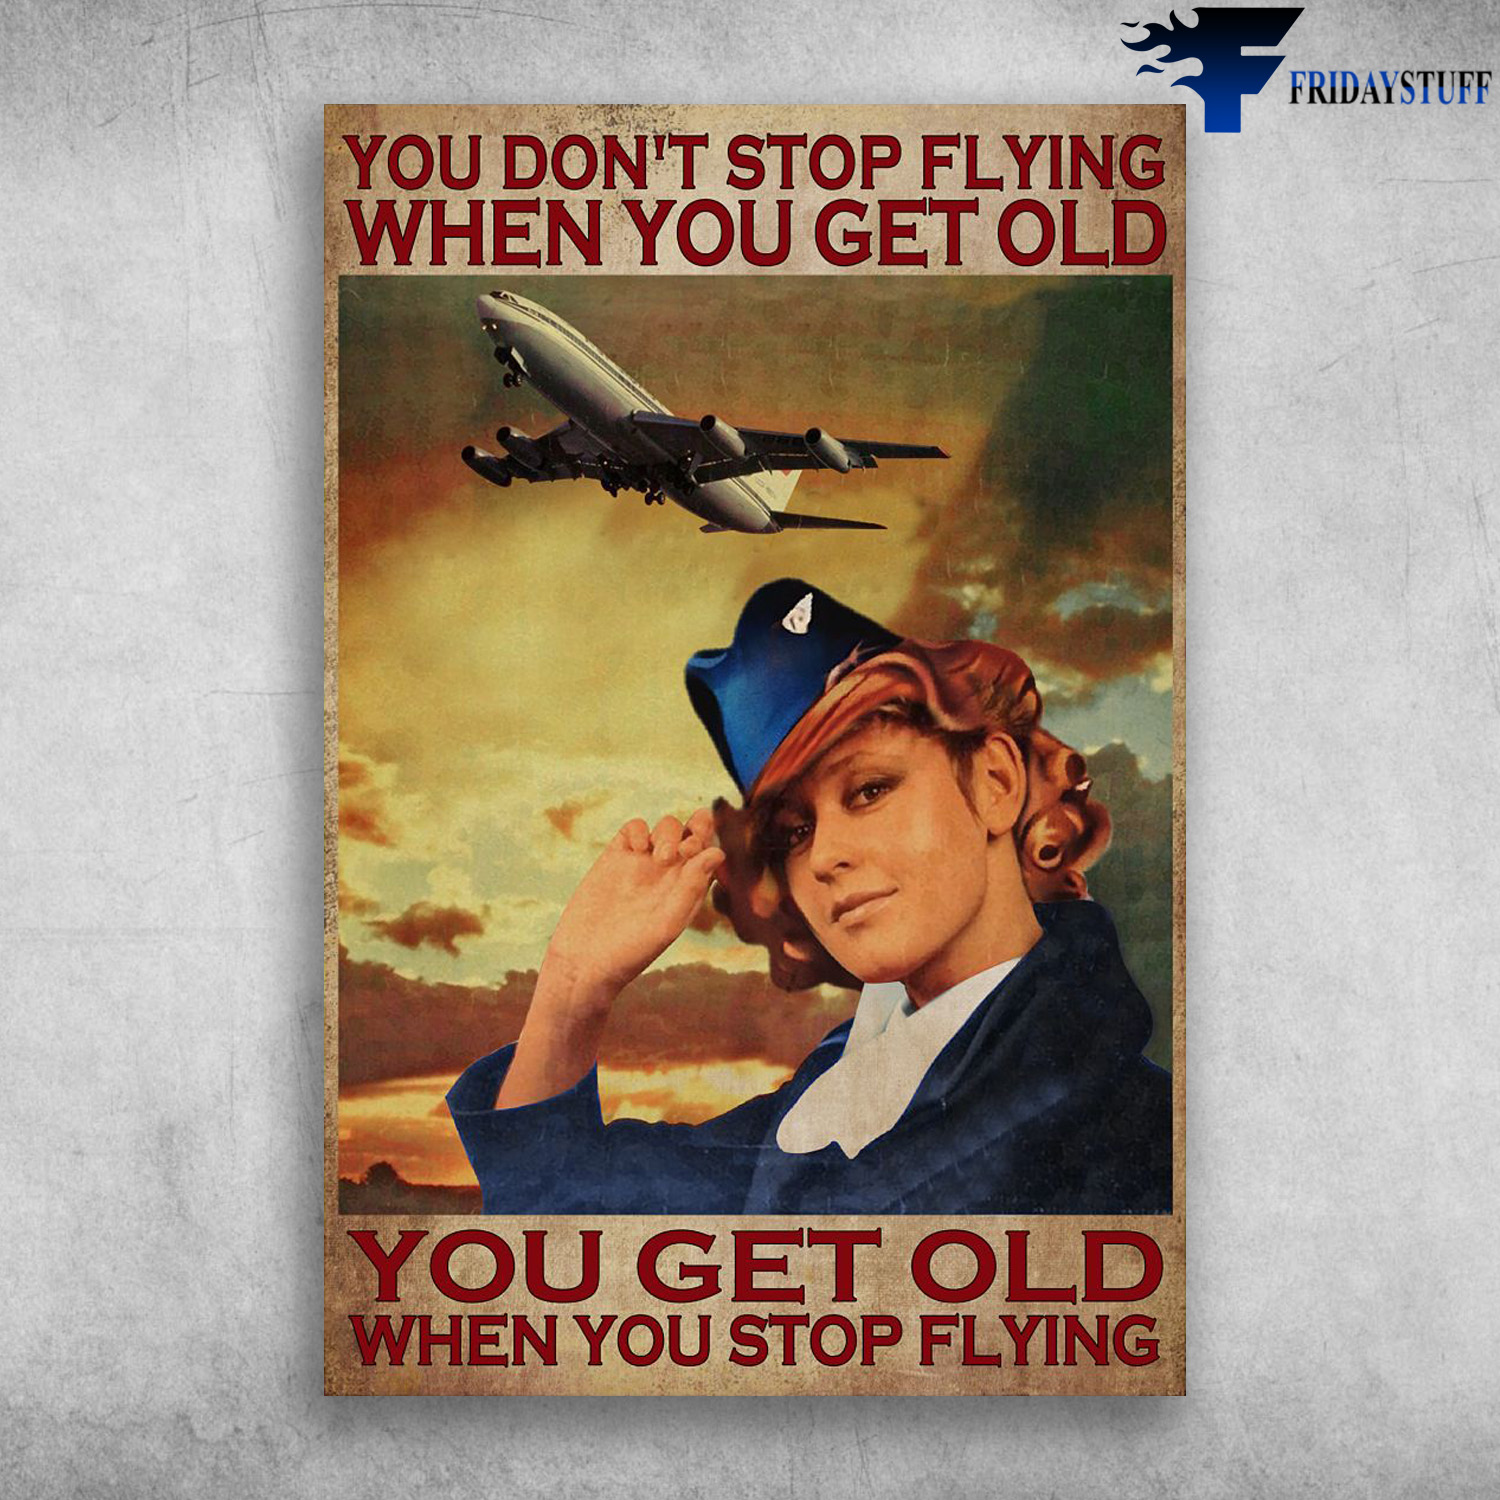 Flight Attendant - You Don't Stop Flying When You Get Old, You Get Old When You Stop Flying